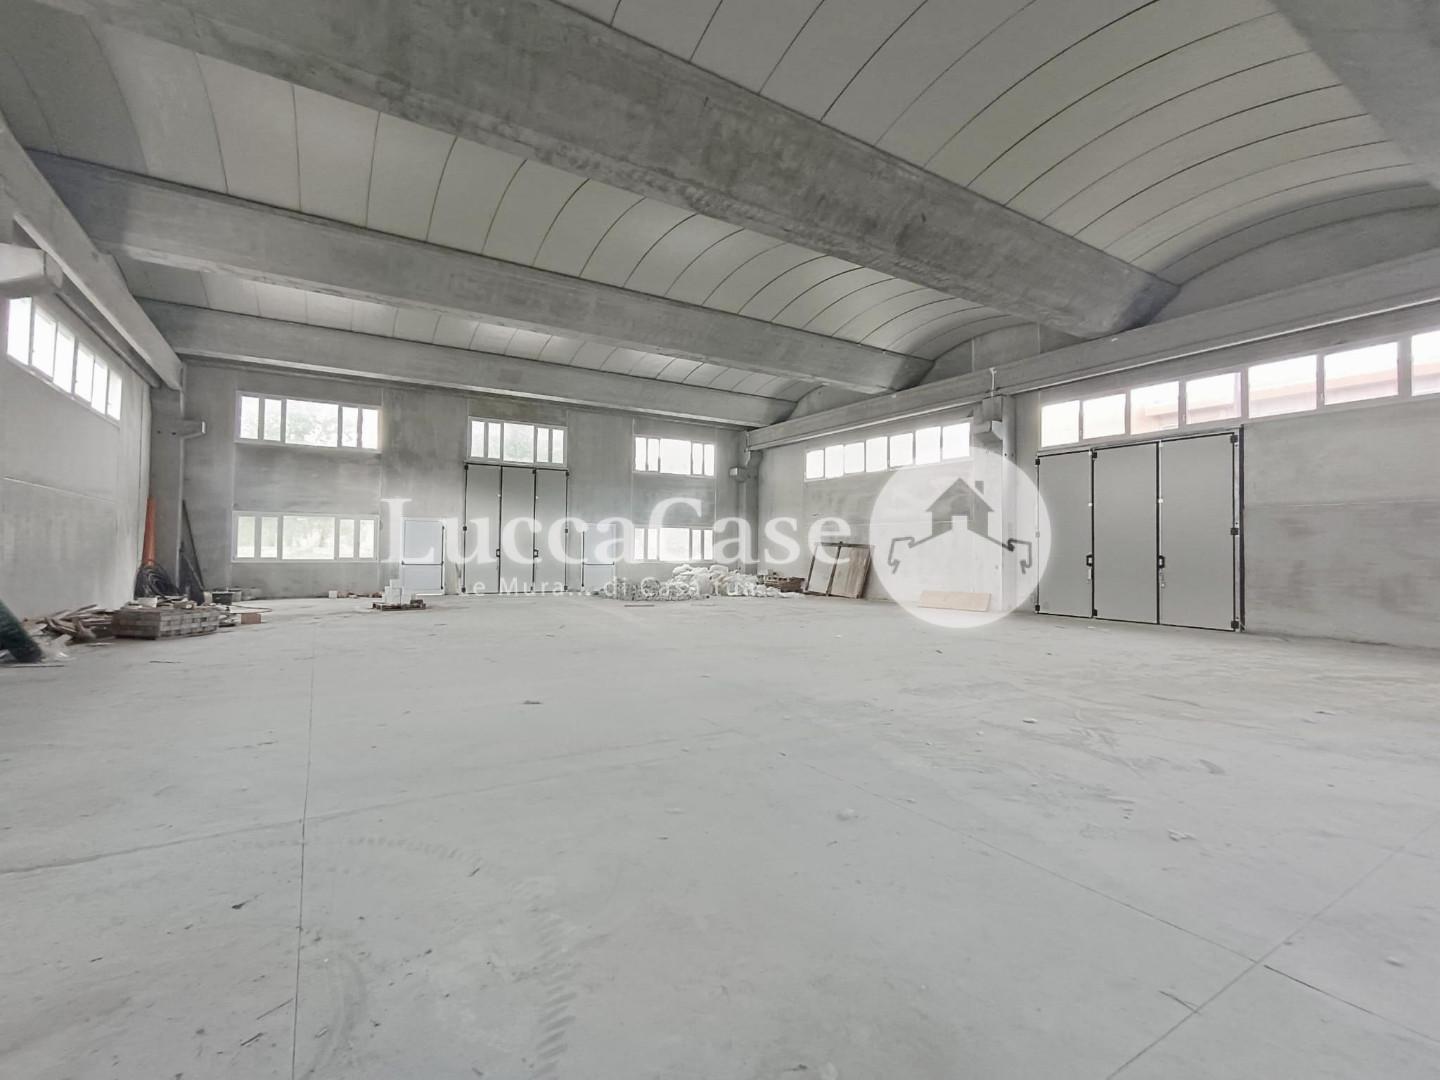 Industrial depot for sale in Lucca